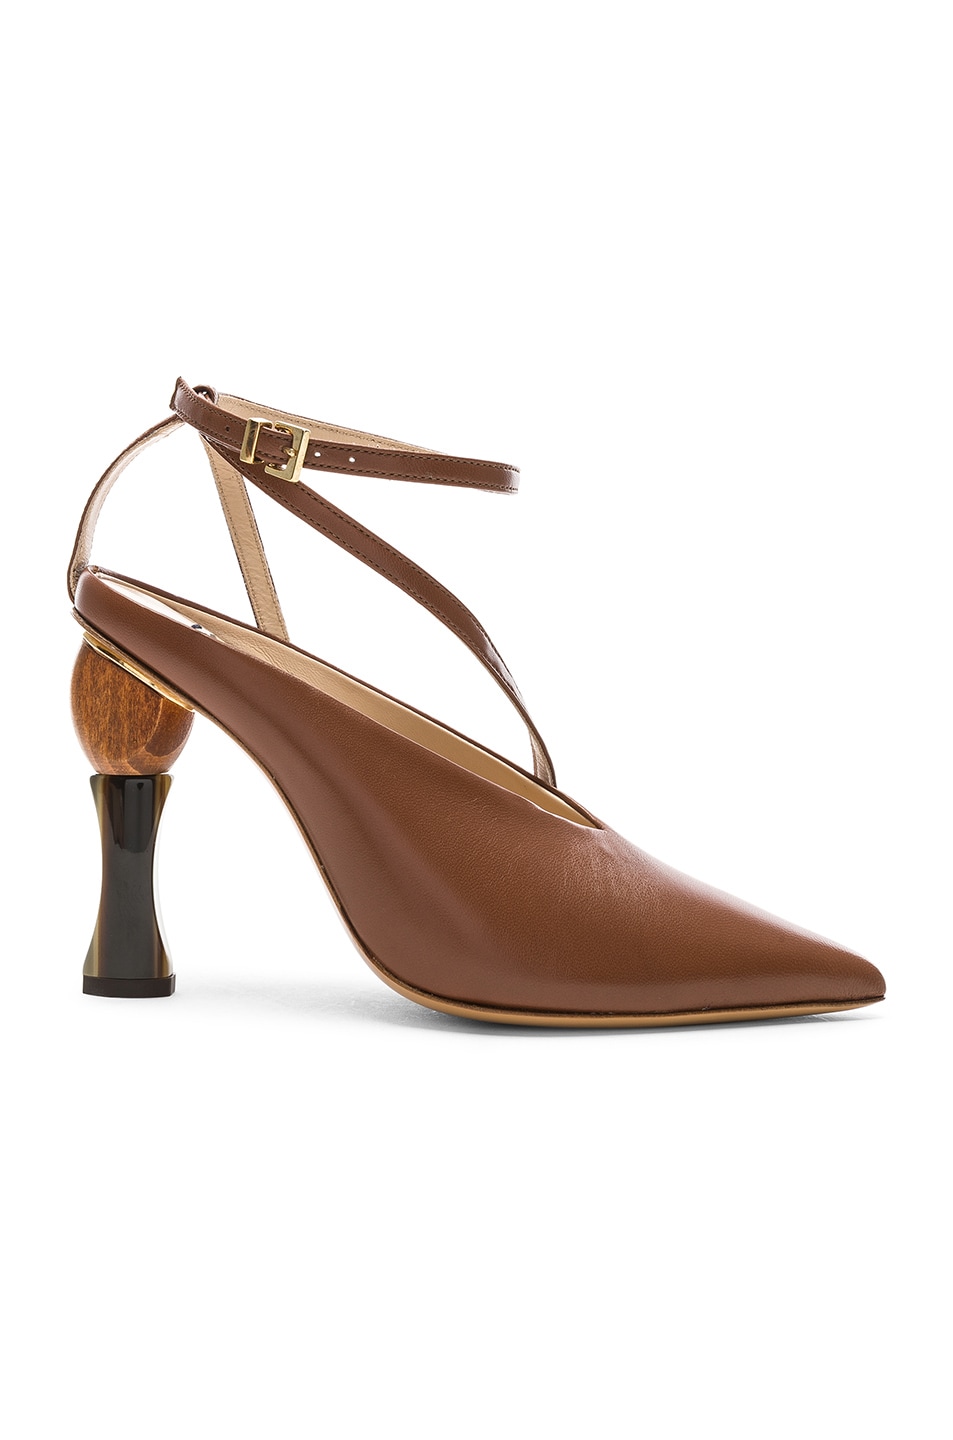 Image 1 of JACQUEMUS Leather Faya Heels in Brown Leather